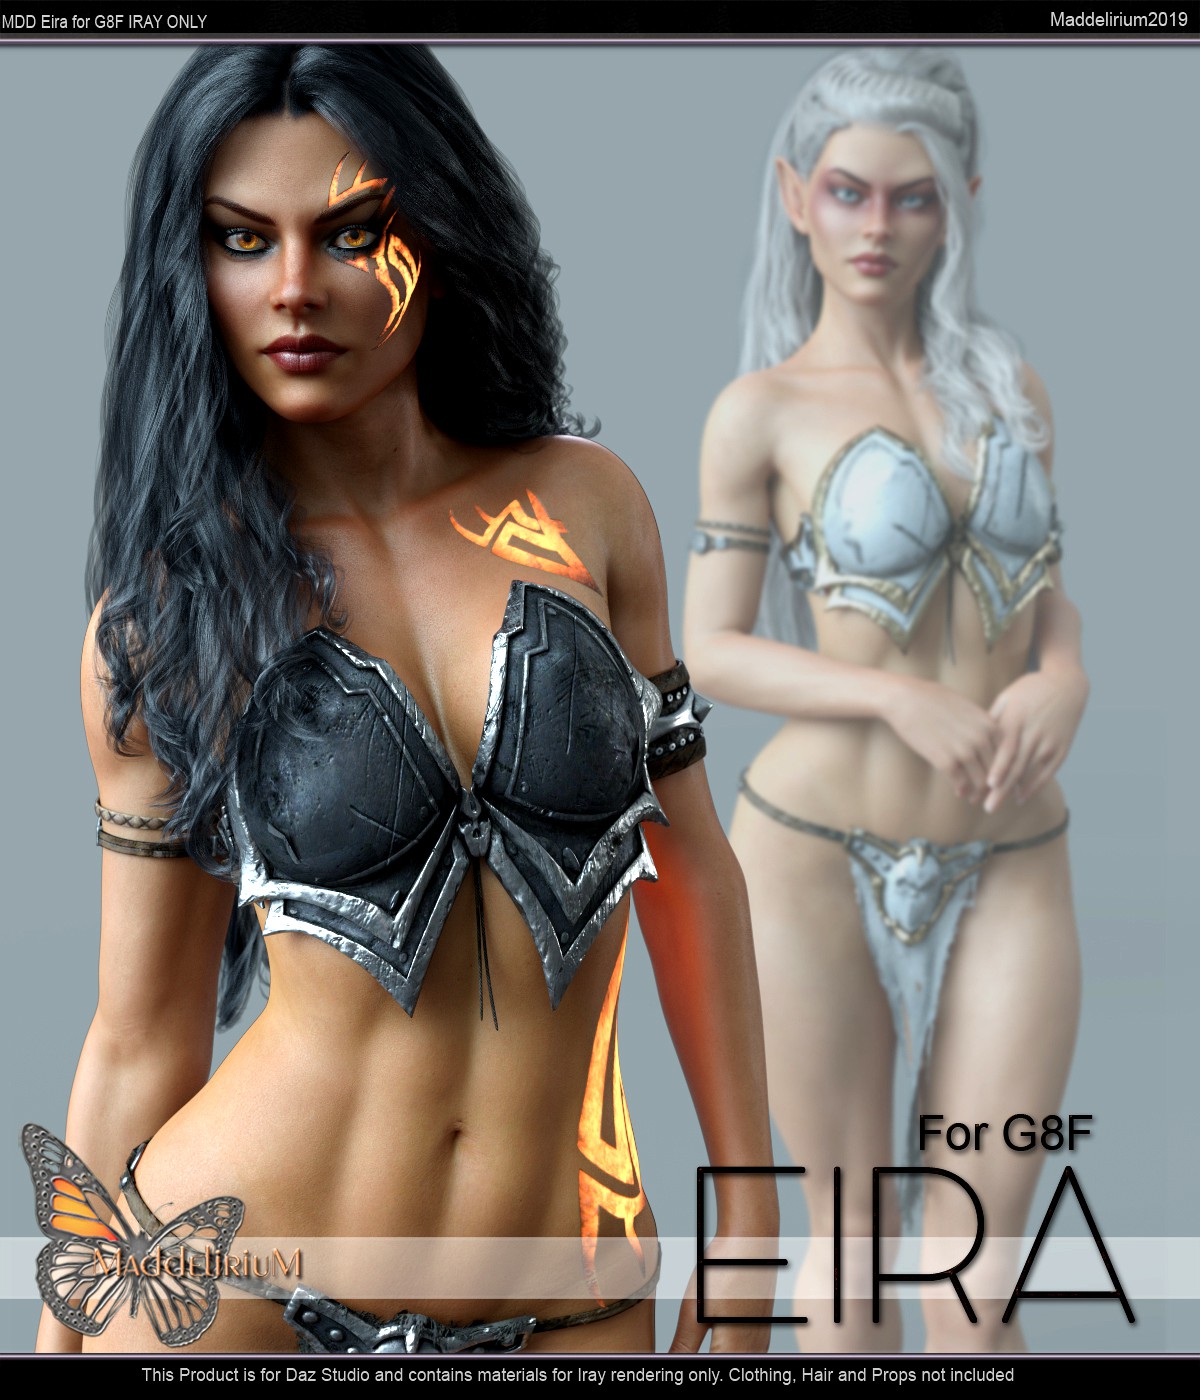 MDD Eira for G8F IRAY Only